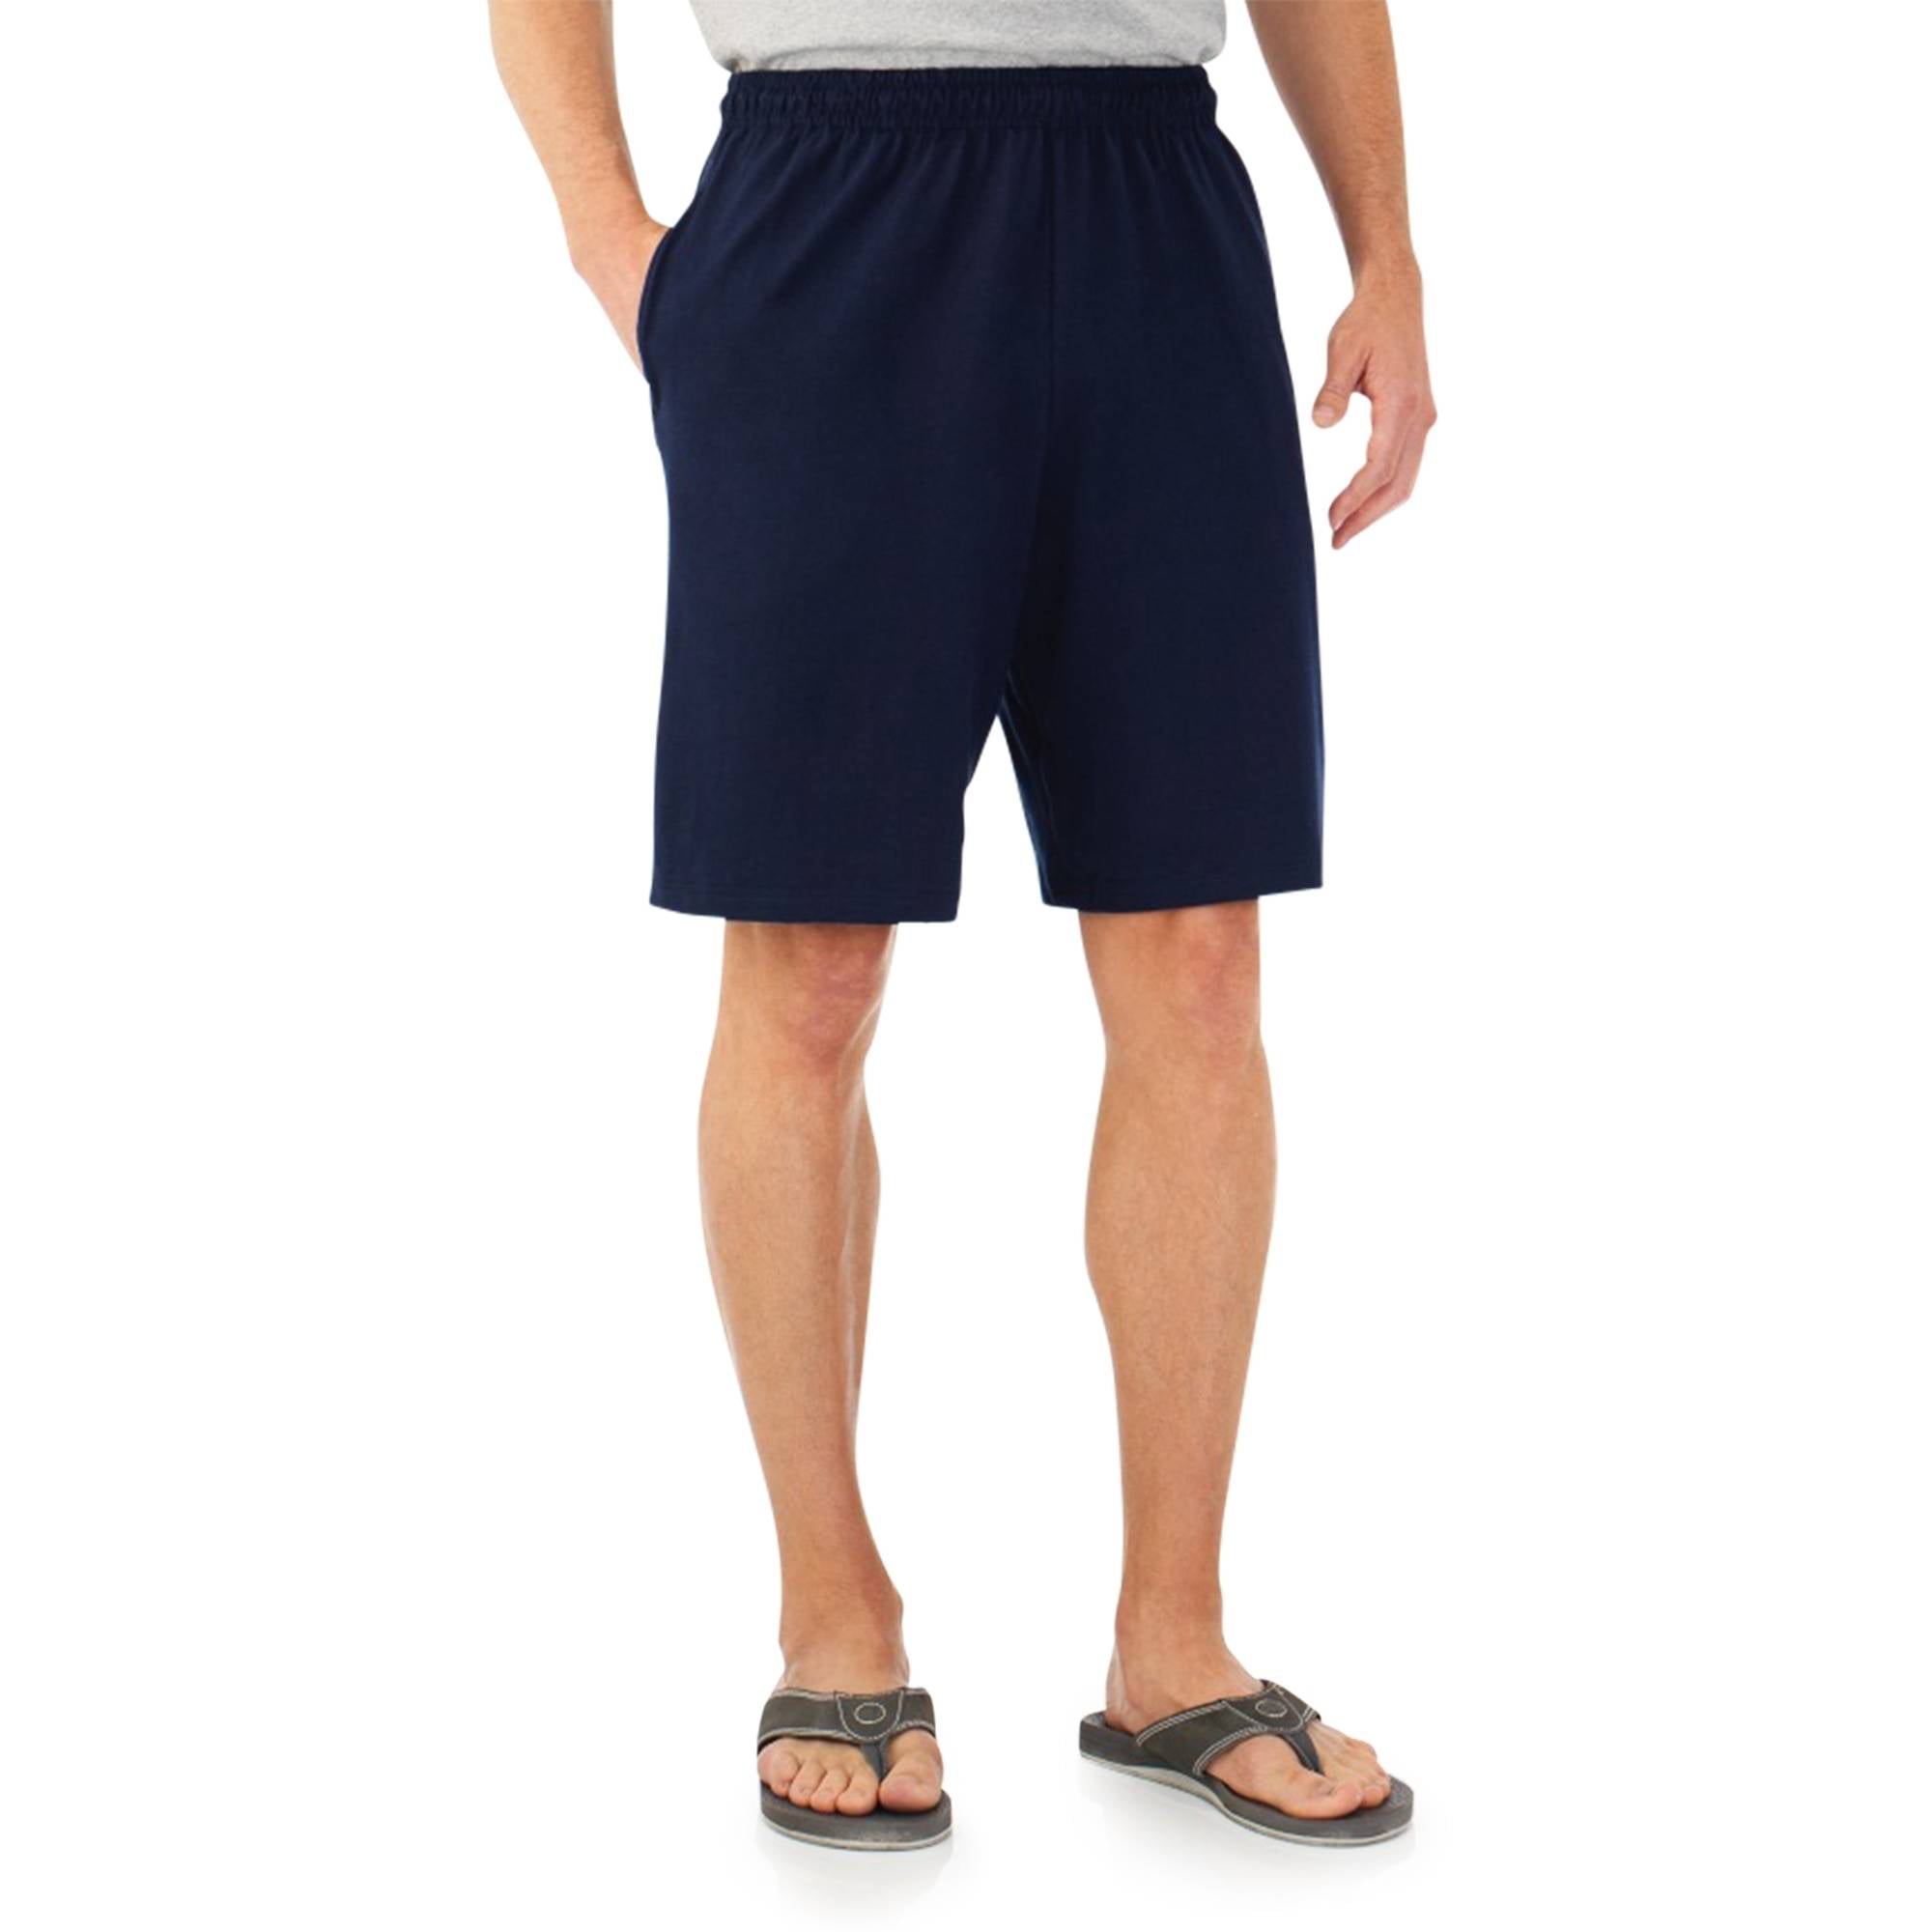 fruit of the loom men's jersey shorts with side pockets